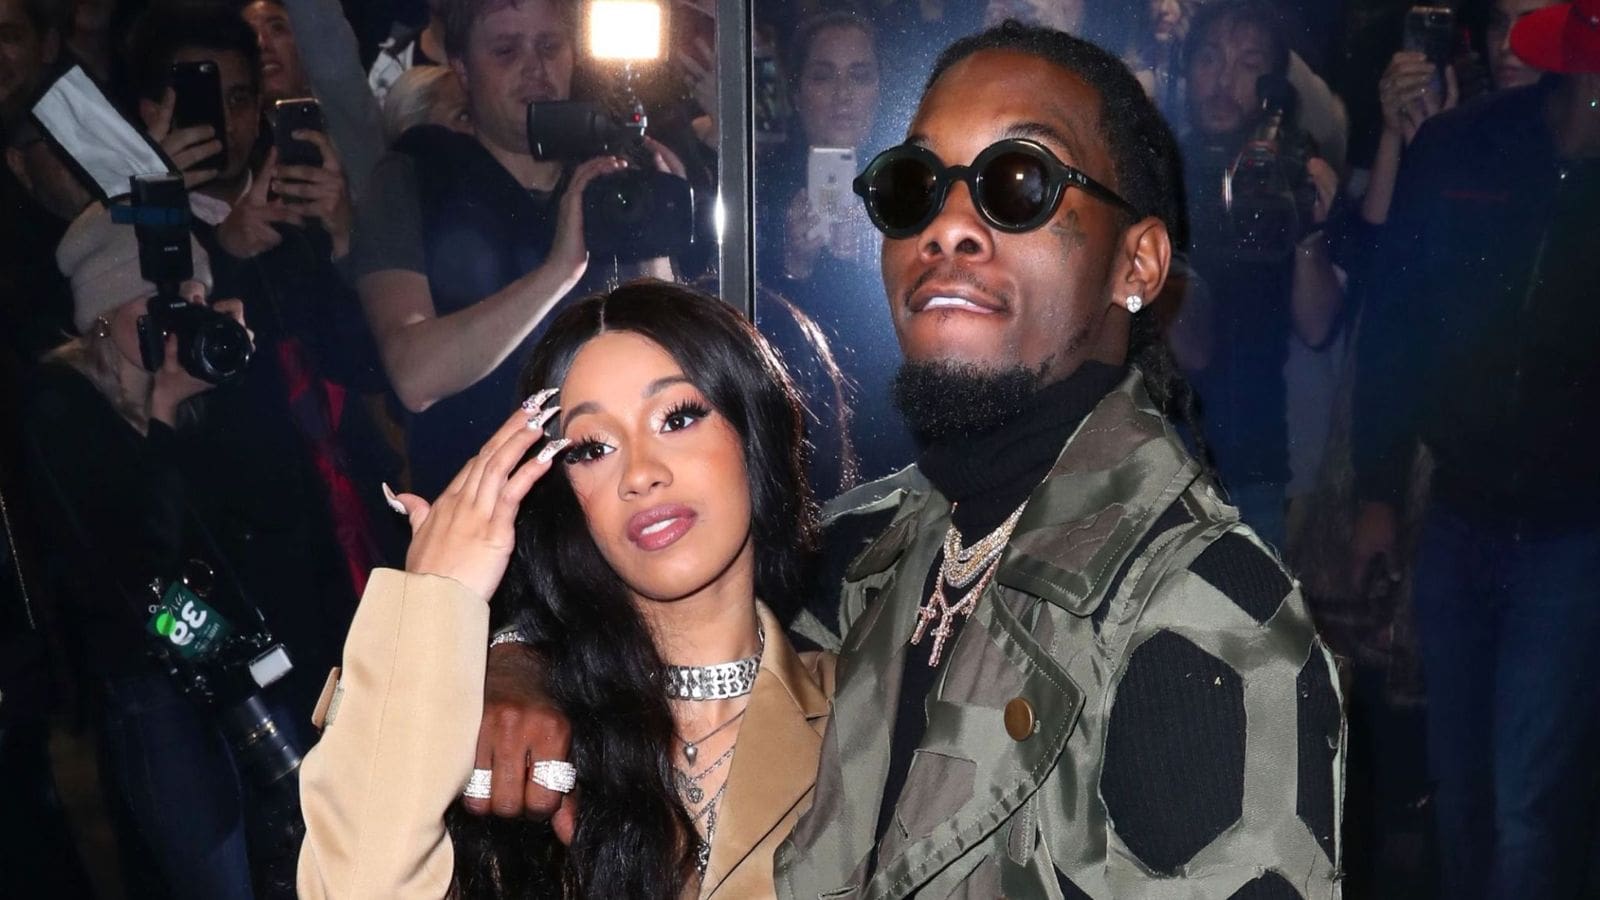 Cardi B and Offset Spotted Partying Together at Atlanta Nightclub After Reconciling